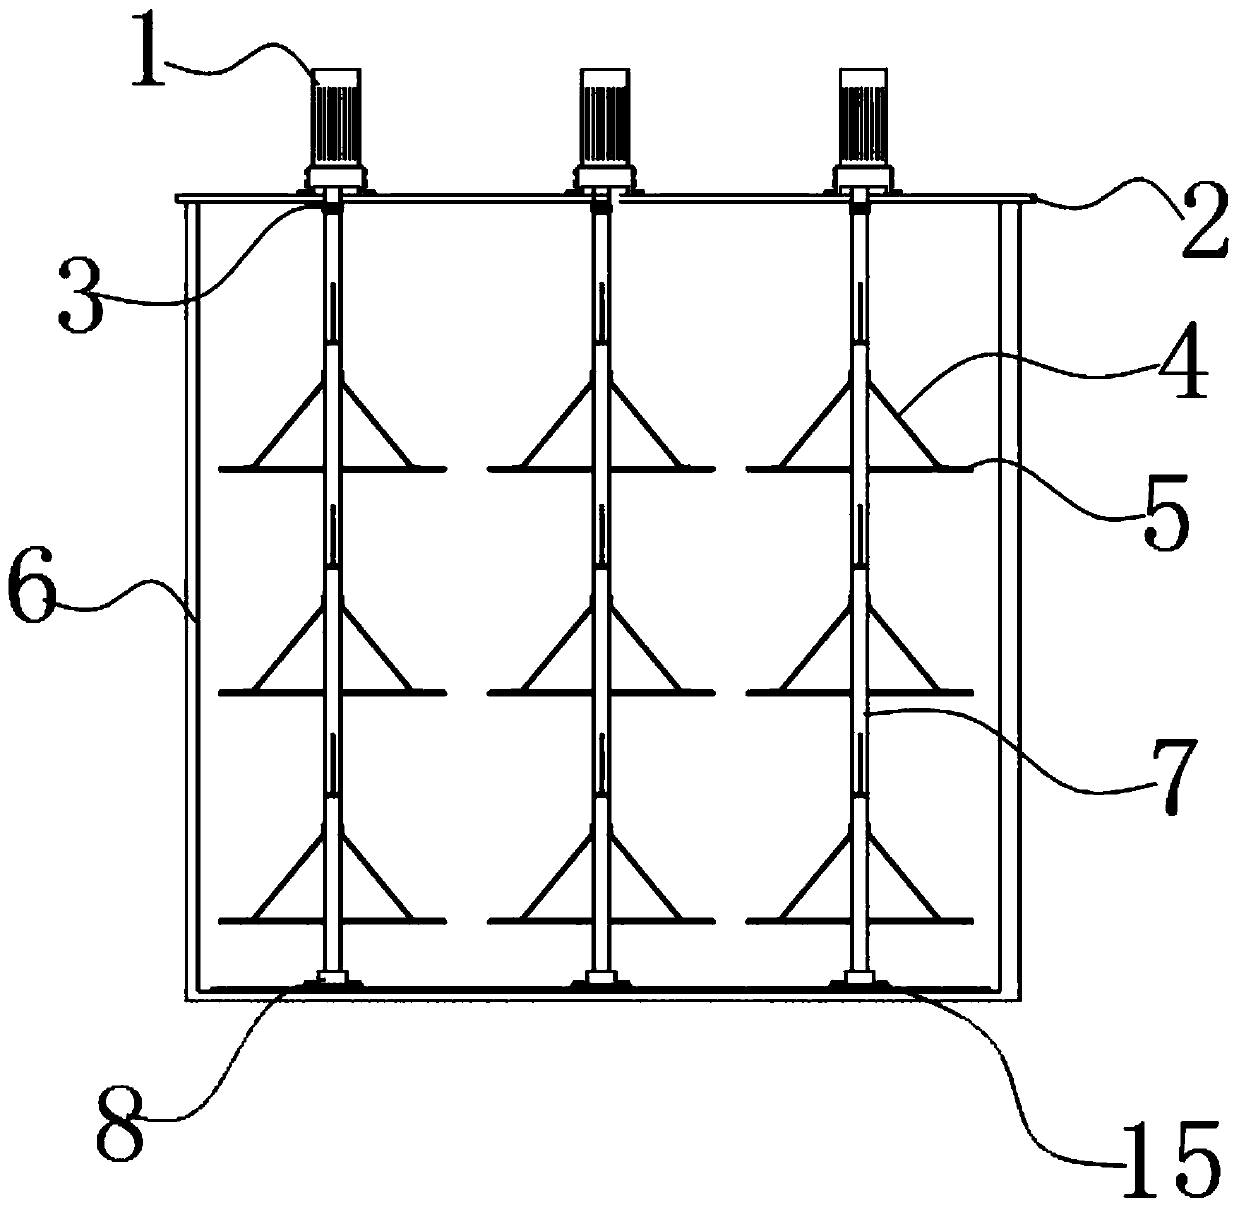 Mixing device for producing high-performance permanent magnetic ferrite material